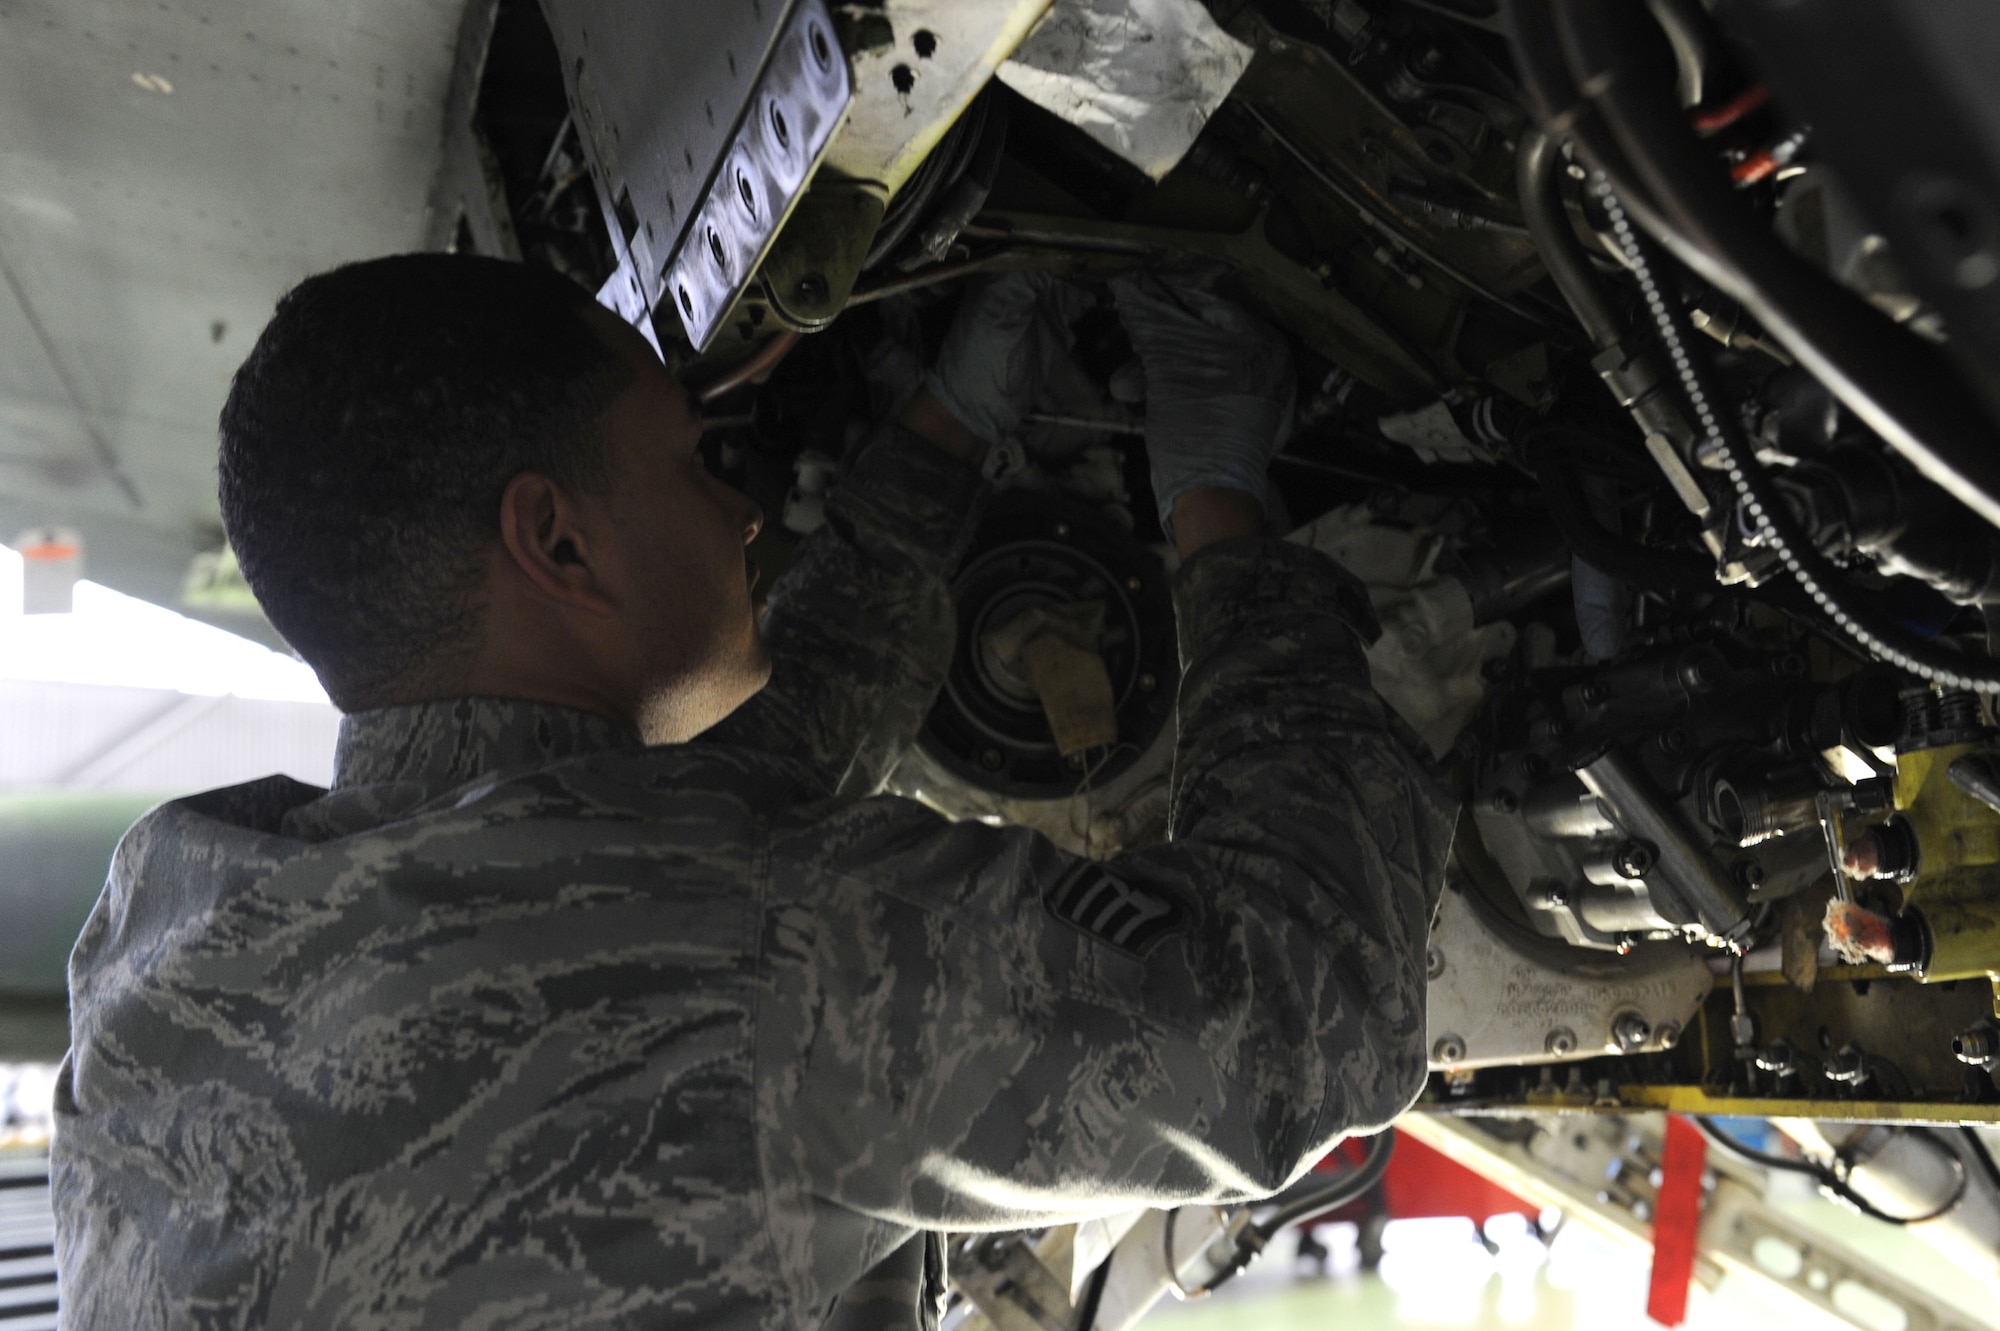 SPANGDAHLEM AIR BASE, Germany – Staff Sgt. Ray Frederick, 52nd Aircraft Maintenance Squadron electric environmental technician, re-routes a wire harness during maintenance on an F-16 Fighting Falcon in Hangar 2 here Jan. 23. Airmen perform maintence daily with different aircraft rotations to ensure the health of the 52nd Fighter Wing fleet. Frederick works to provide the wing mission-capable aircraft through scheduled maintenance as part of the 480th Aircraft Maintenance Unit. (U.S. Air Force photo/Senior Airman Christopher Toon)